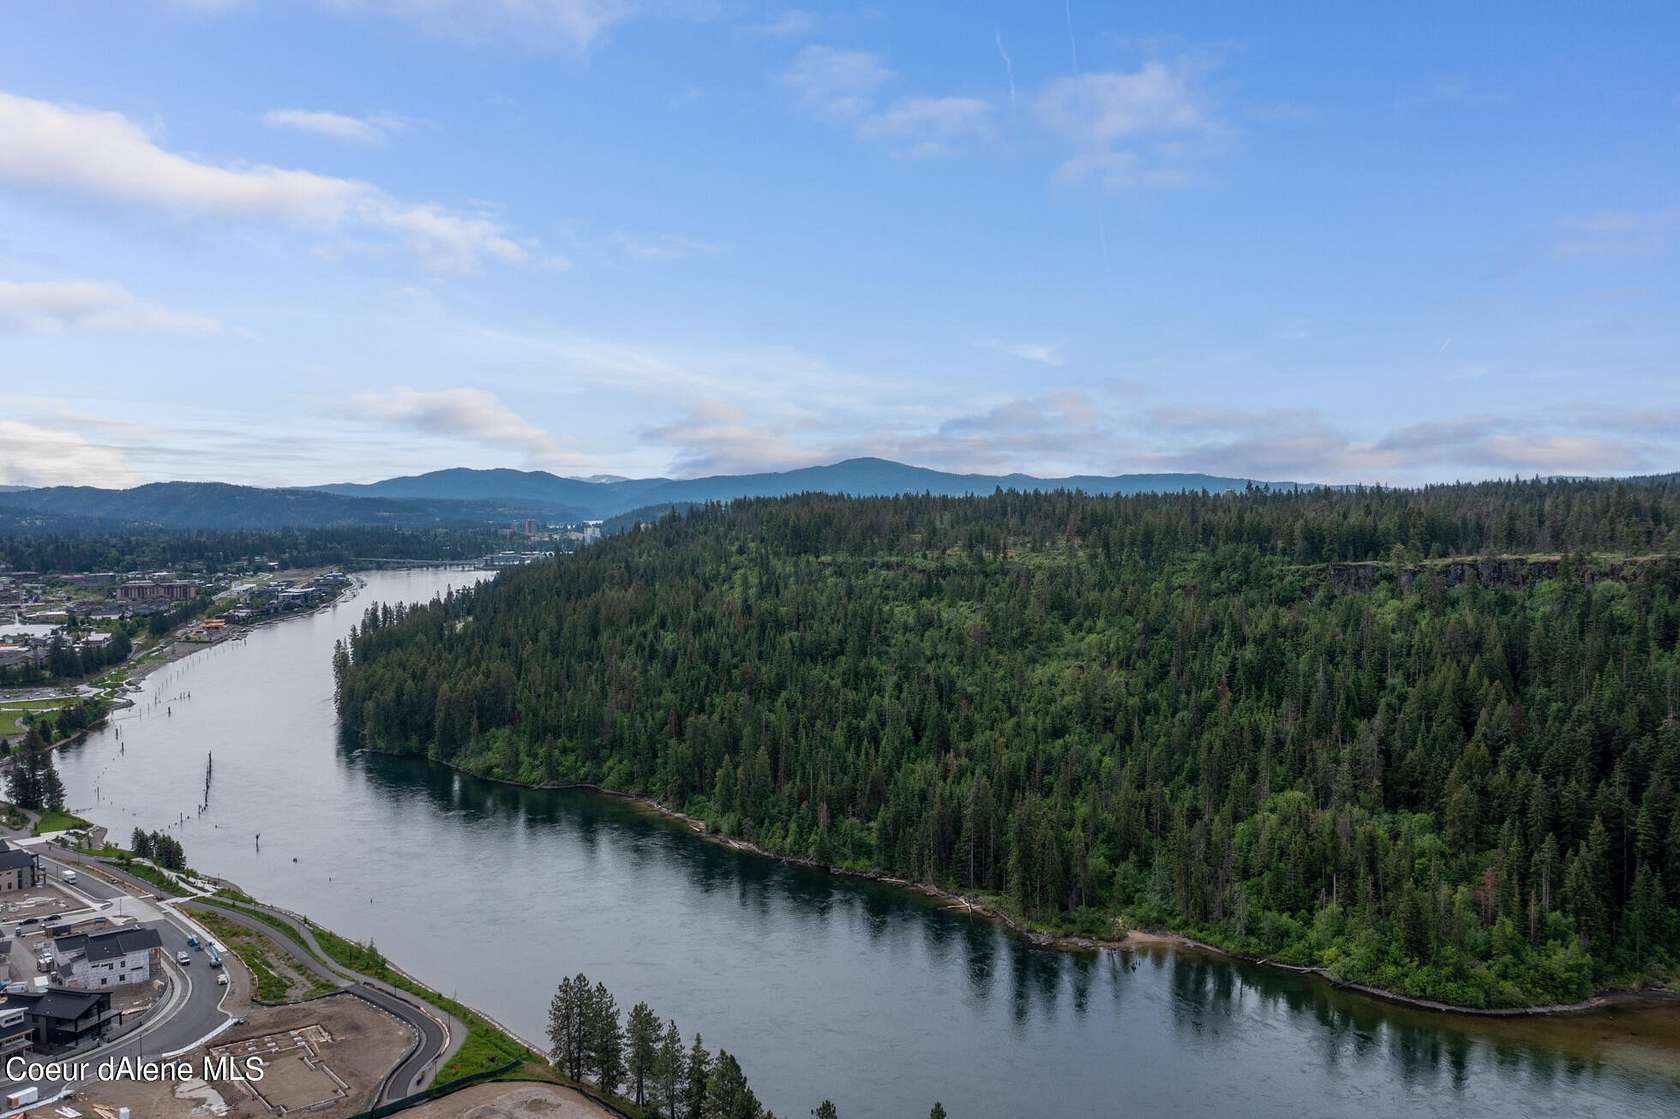 290 Acres of Recreational Land for Sale in Coeur d'Alene, Idaho